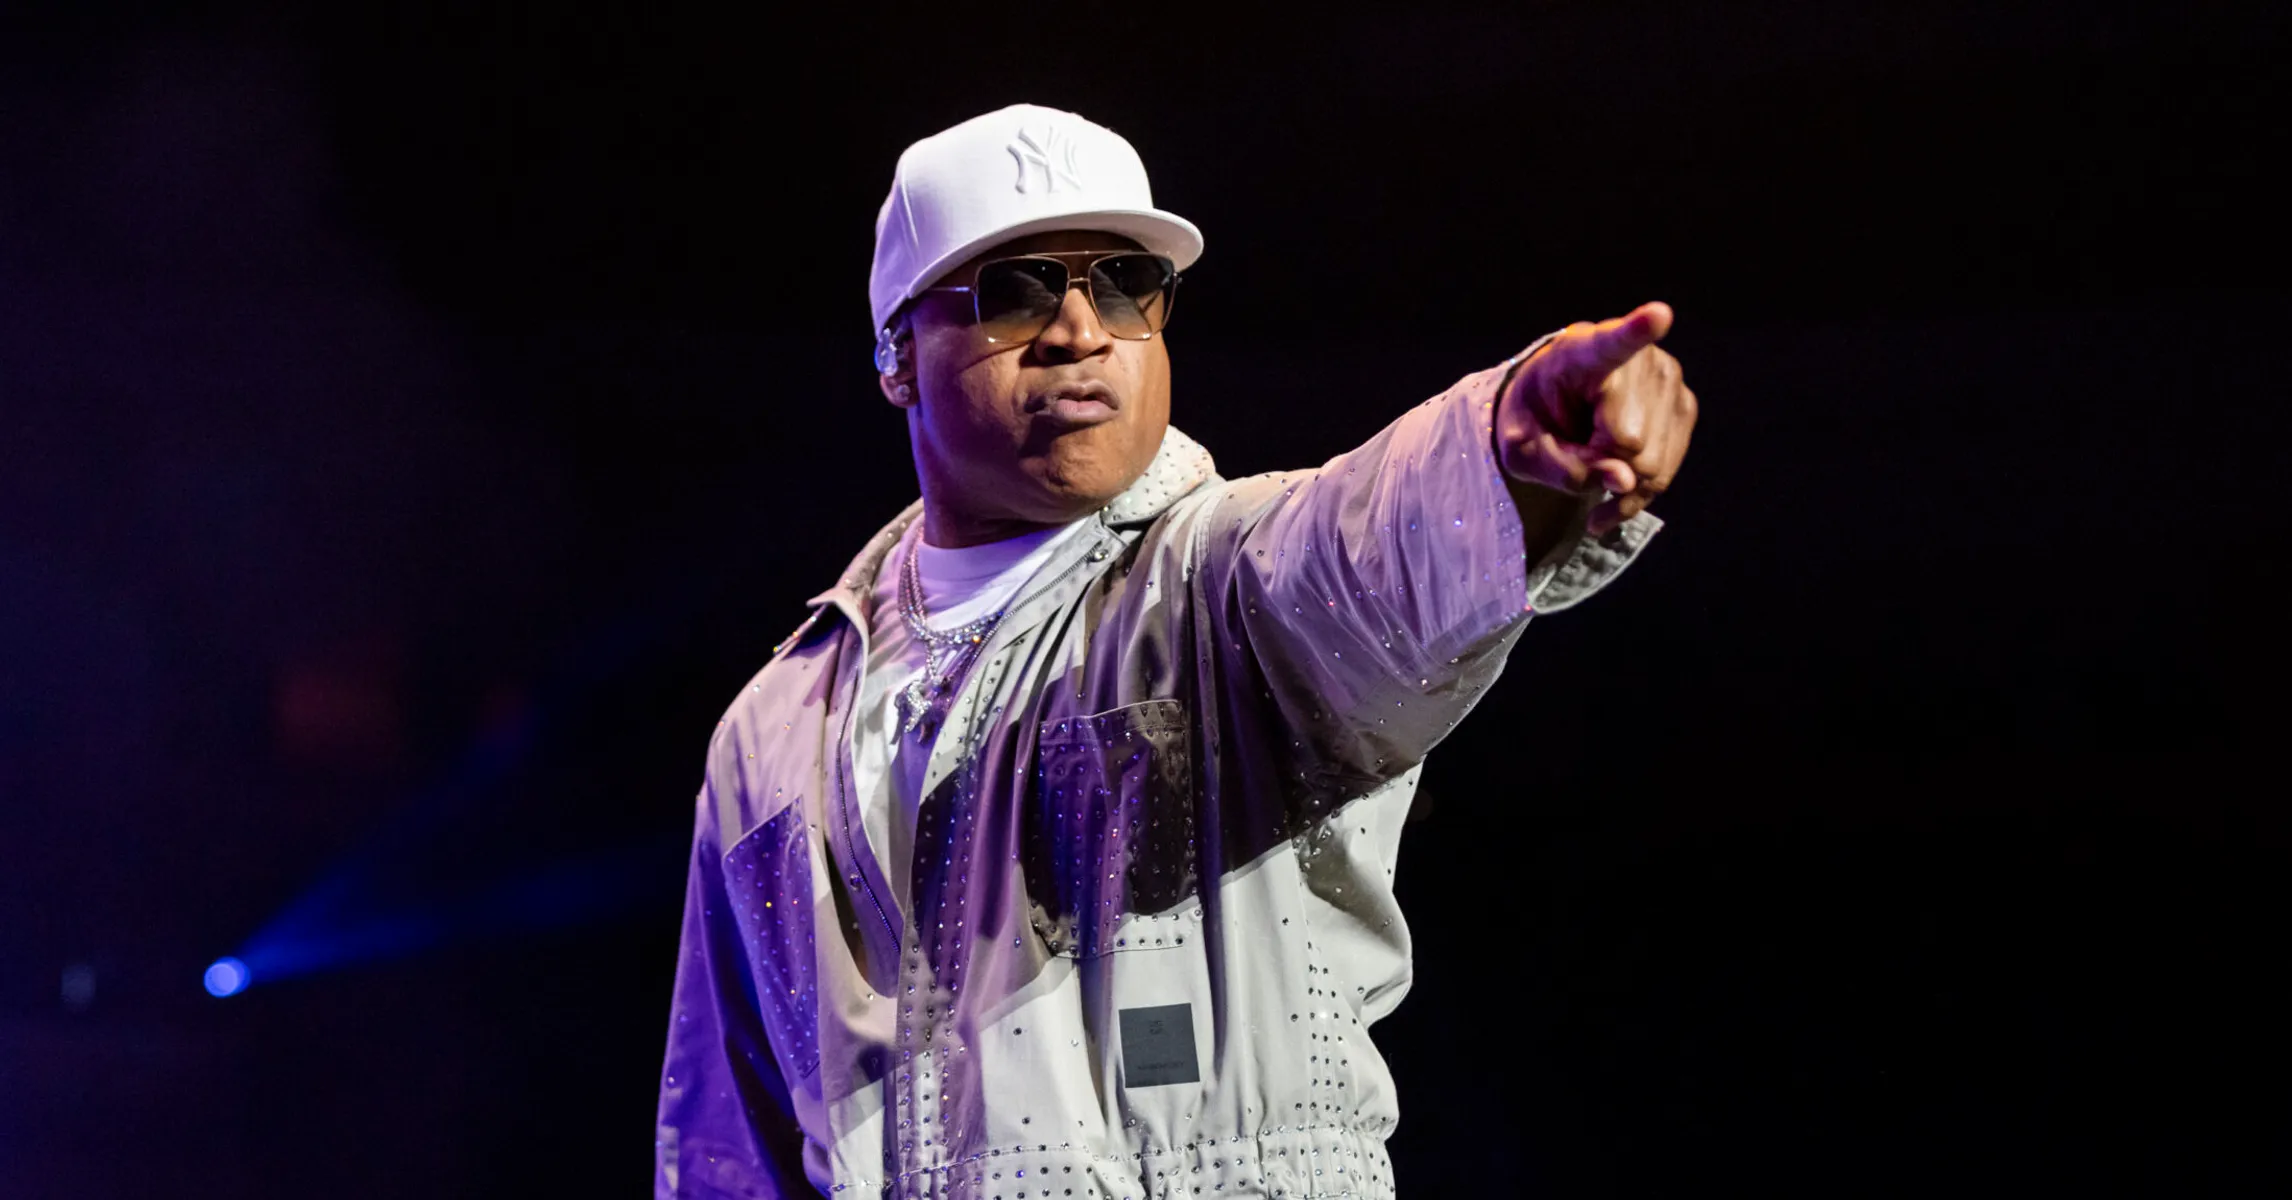 Important songs by LL Cool J